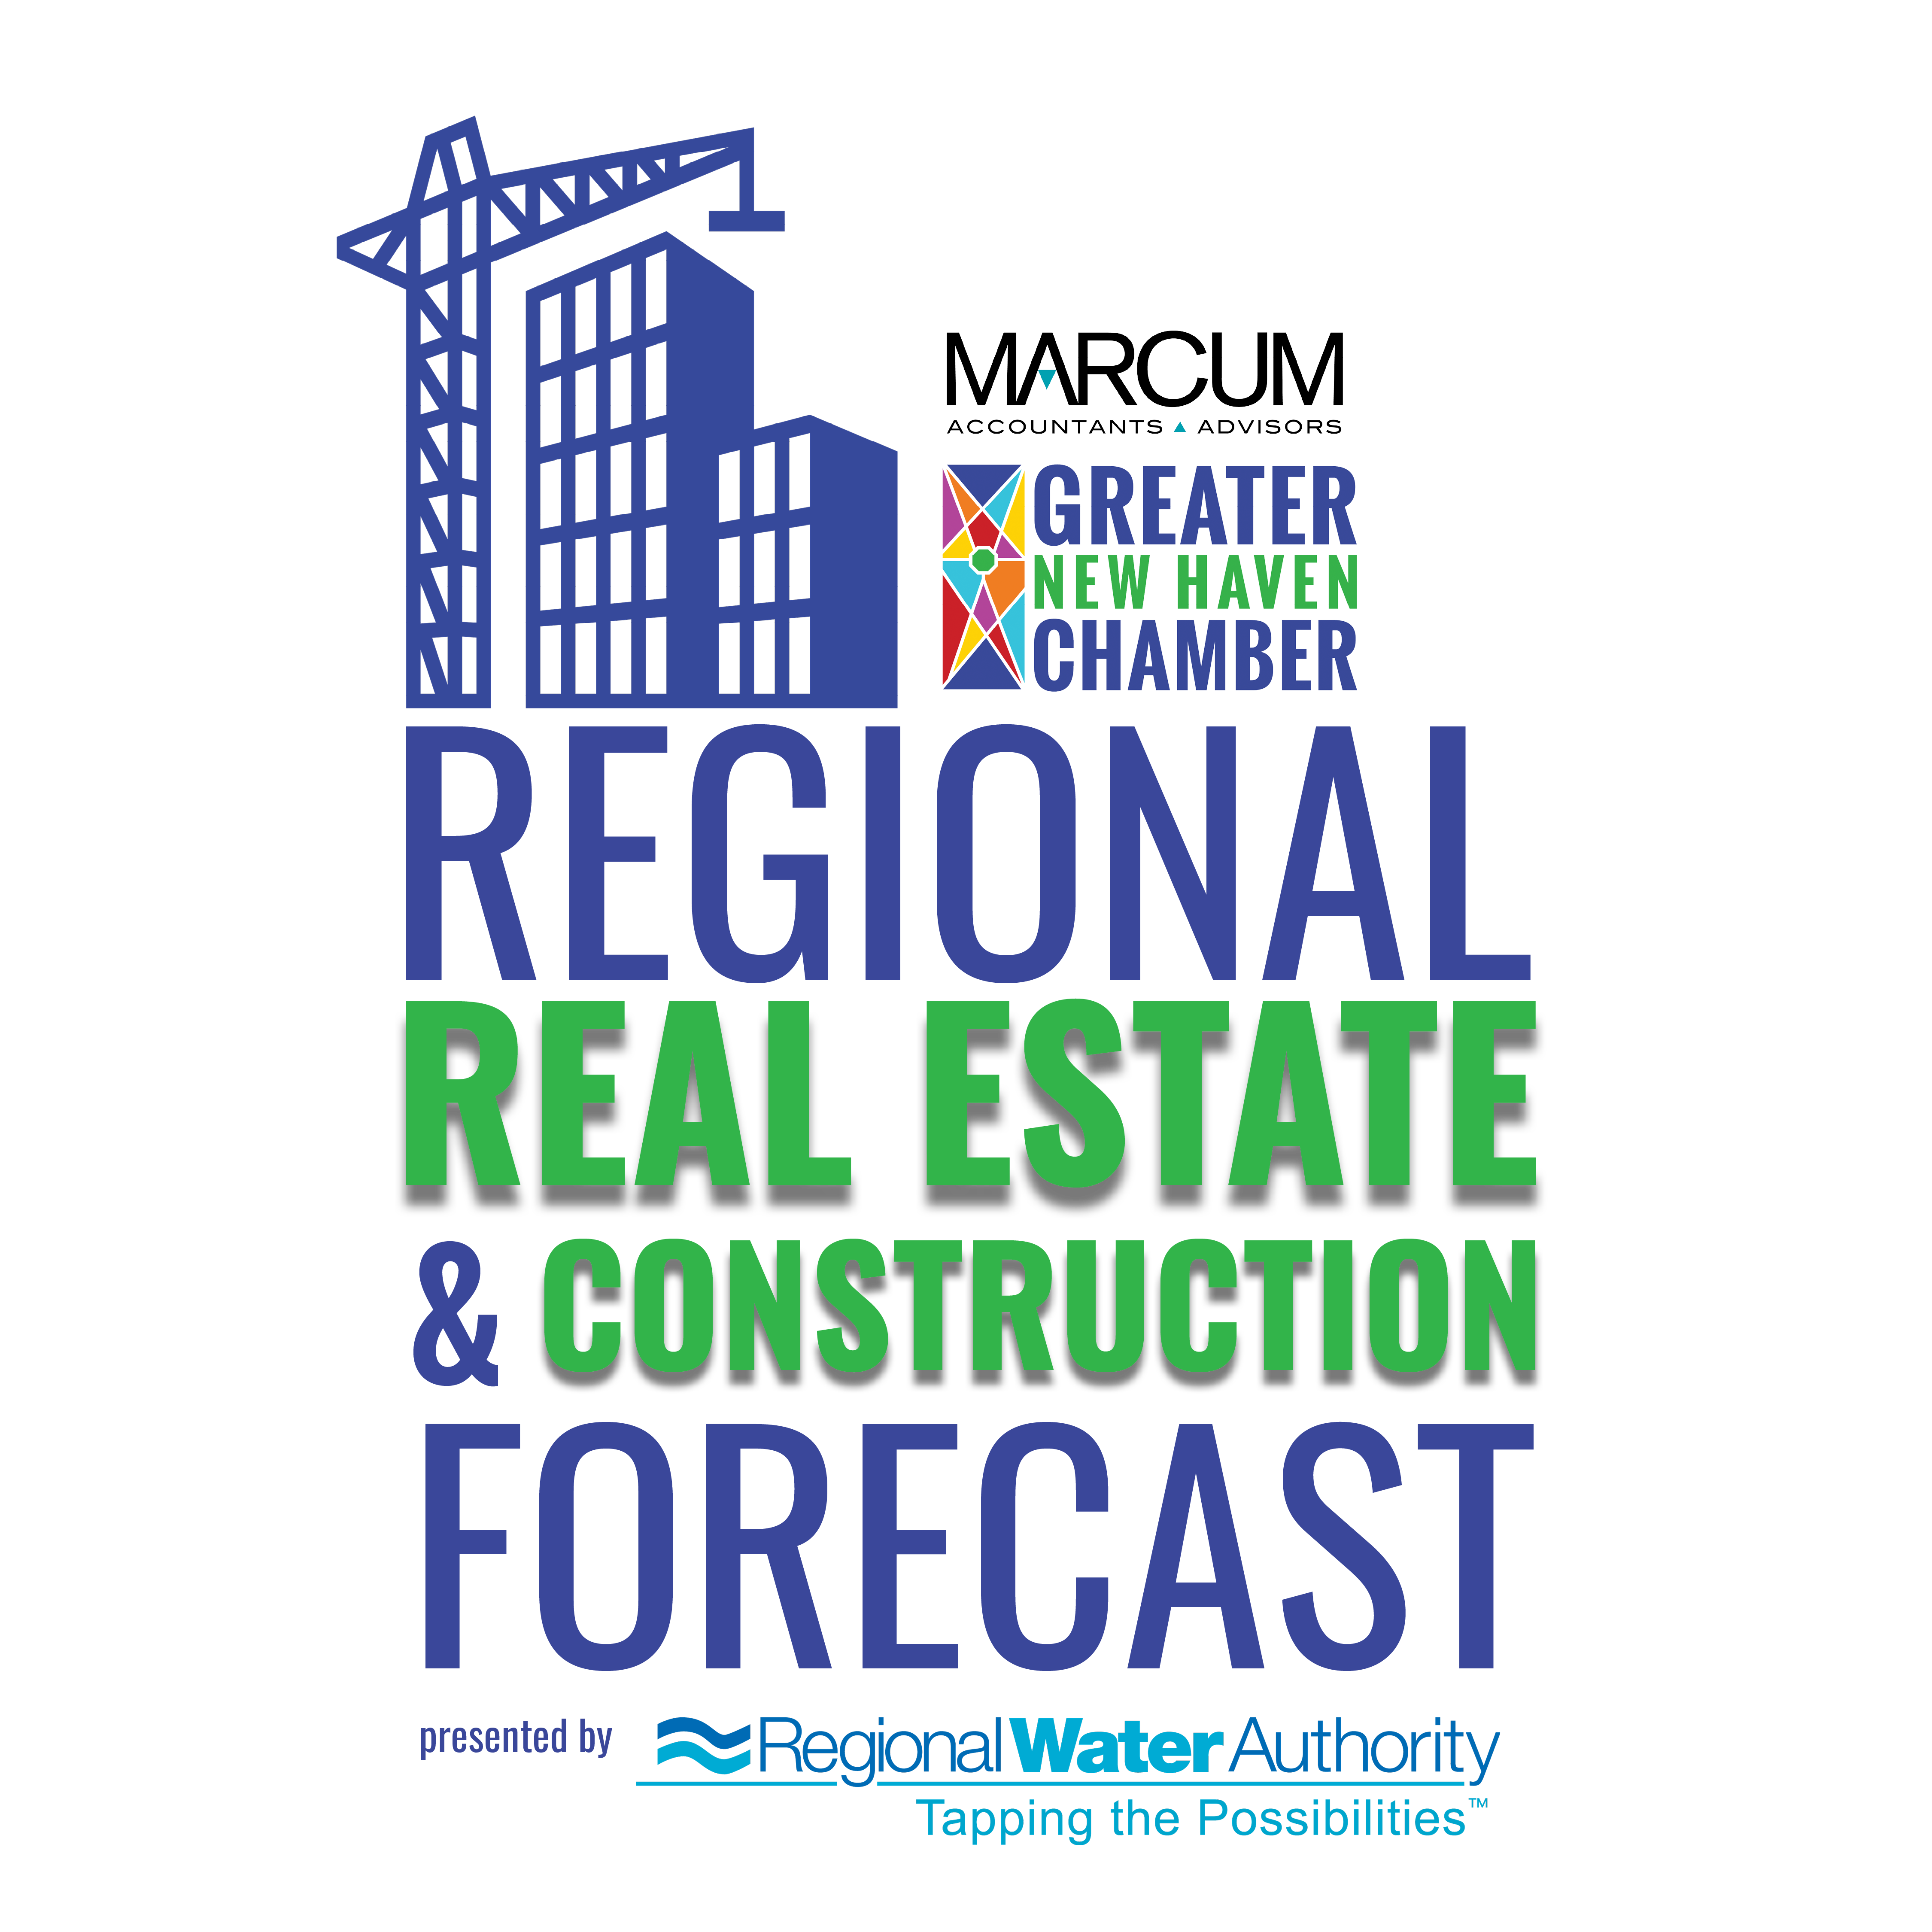 Regional Real Estate & Construction Forecast: DECD Commissioner David Lehman and Developers of Olive + Wooster, Elm City Bioscience Center, and Jaigantic Studios to Provide Updates